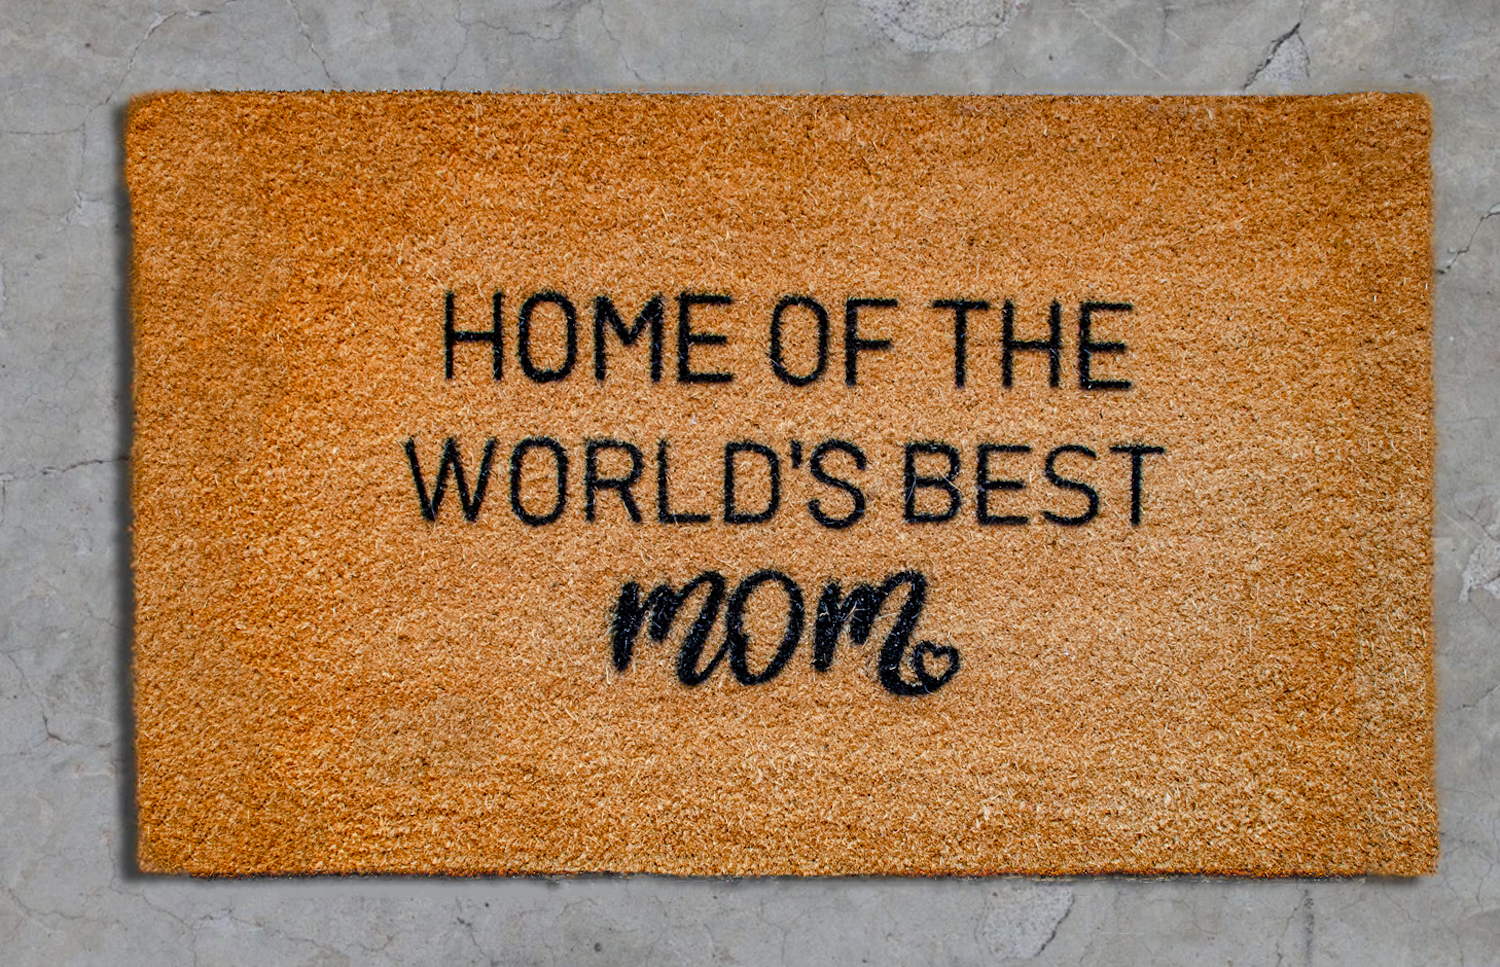 Home of the world's best Mom